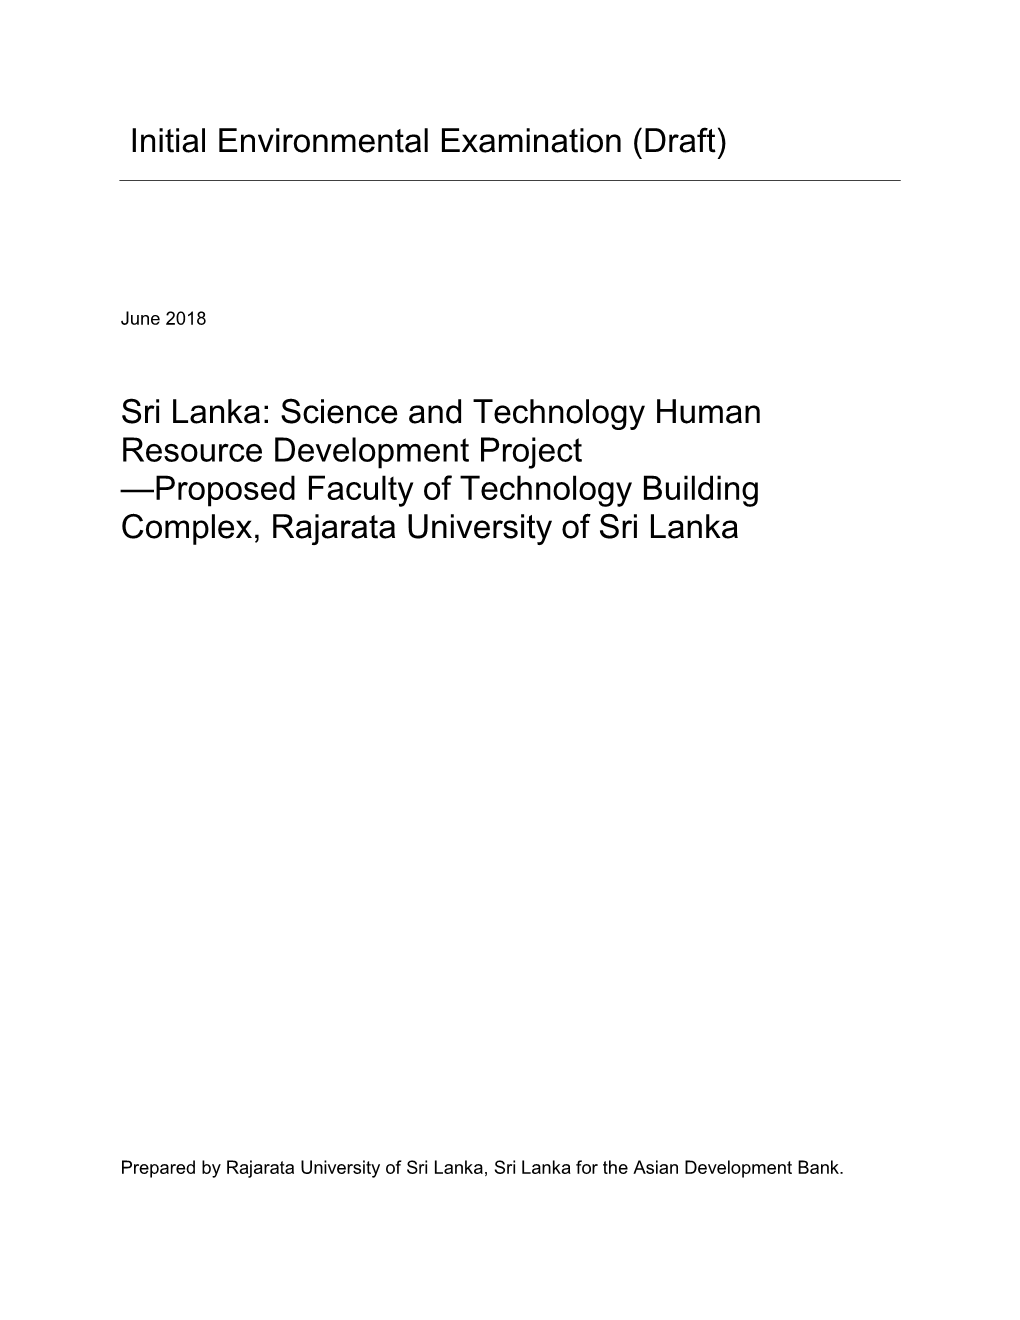 Science and Technology Human Resource Development Project —Proposed Faculty of Technology Building Complex, Rajarata University of Sri Lanka